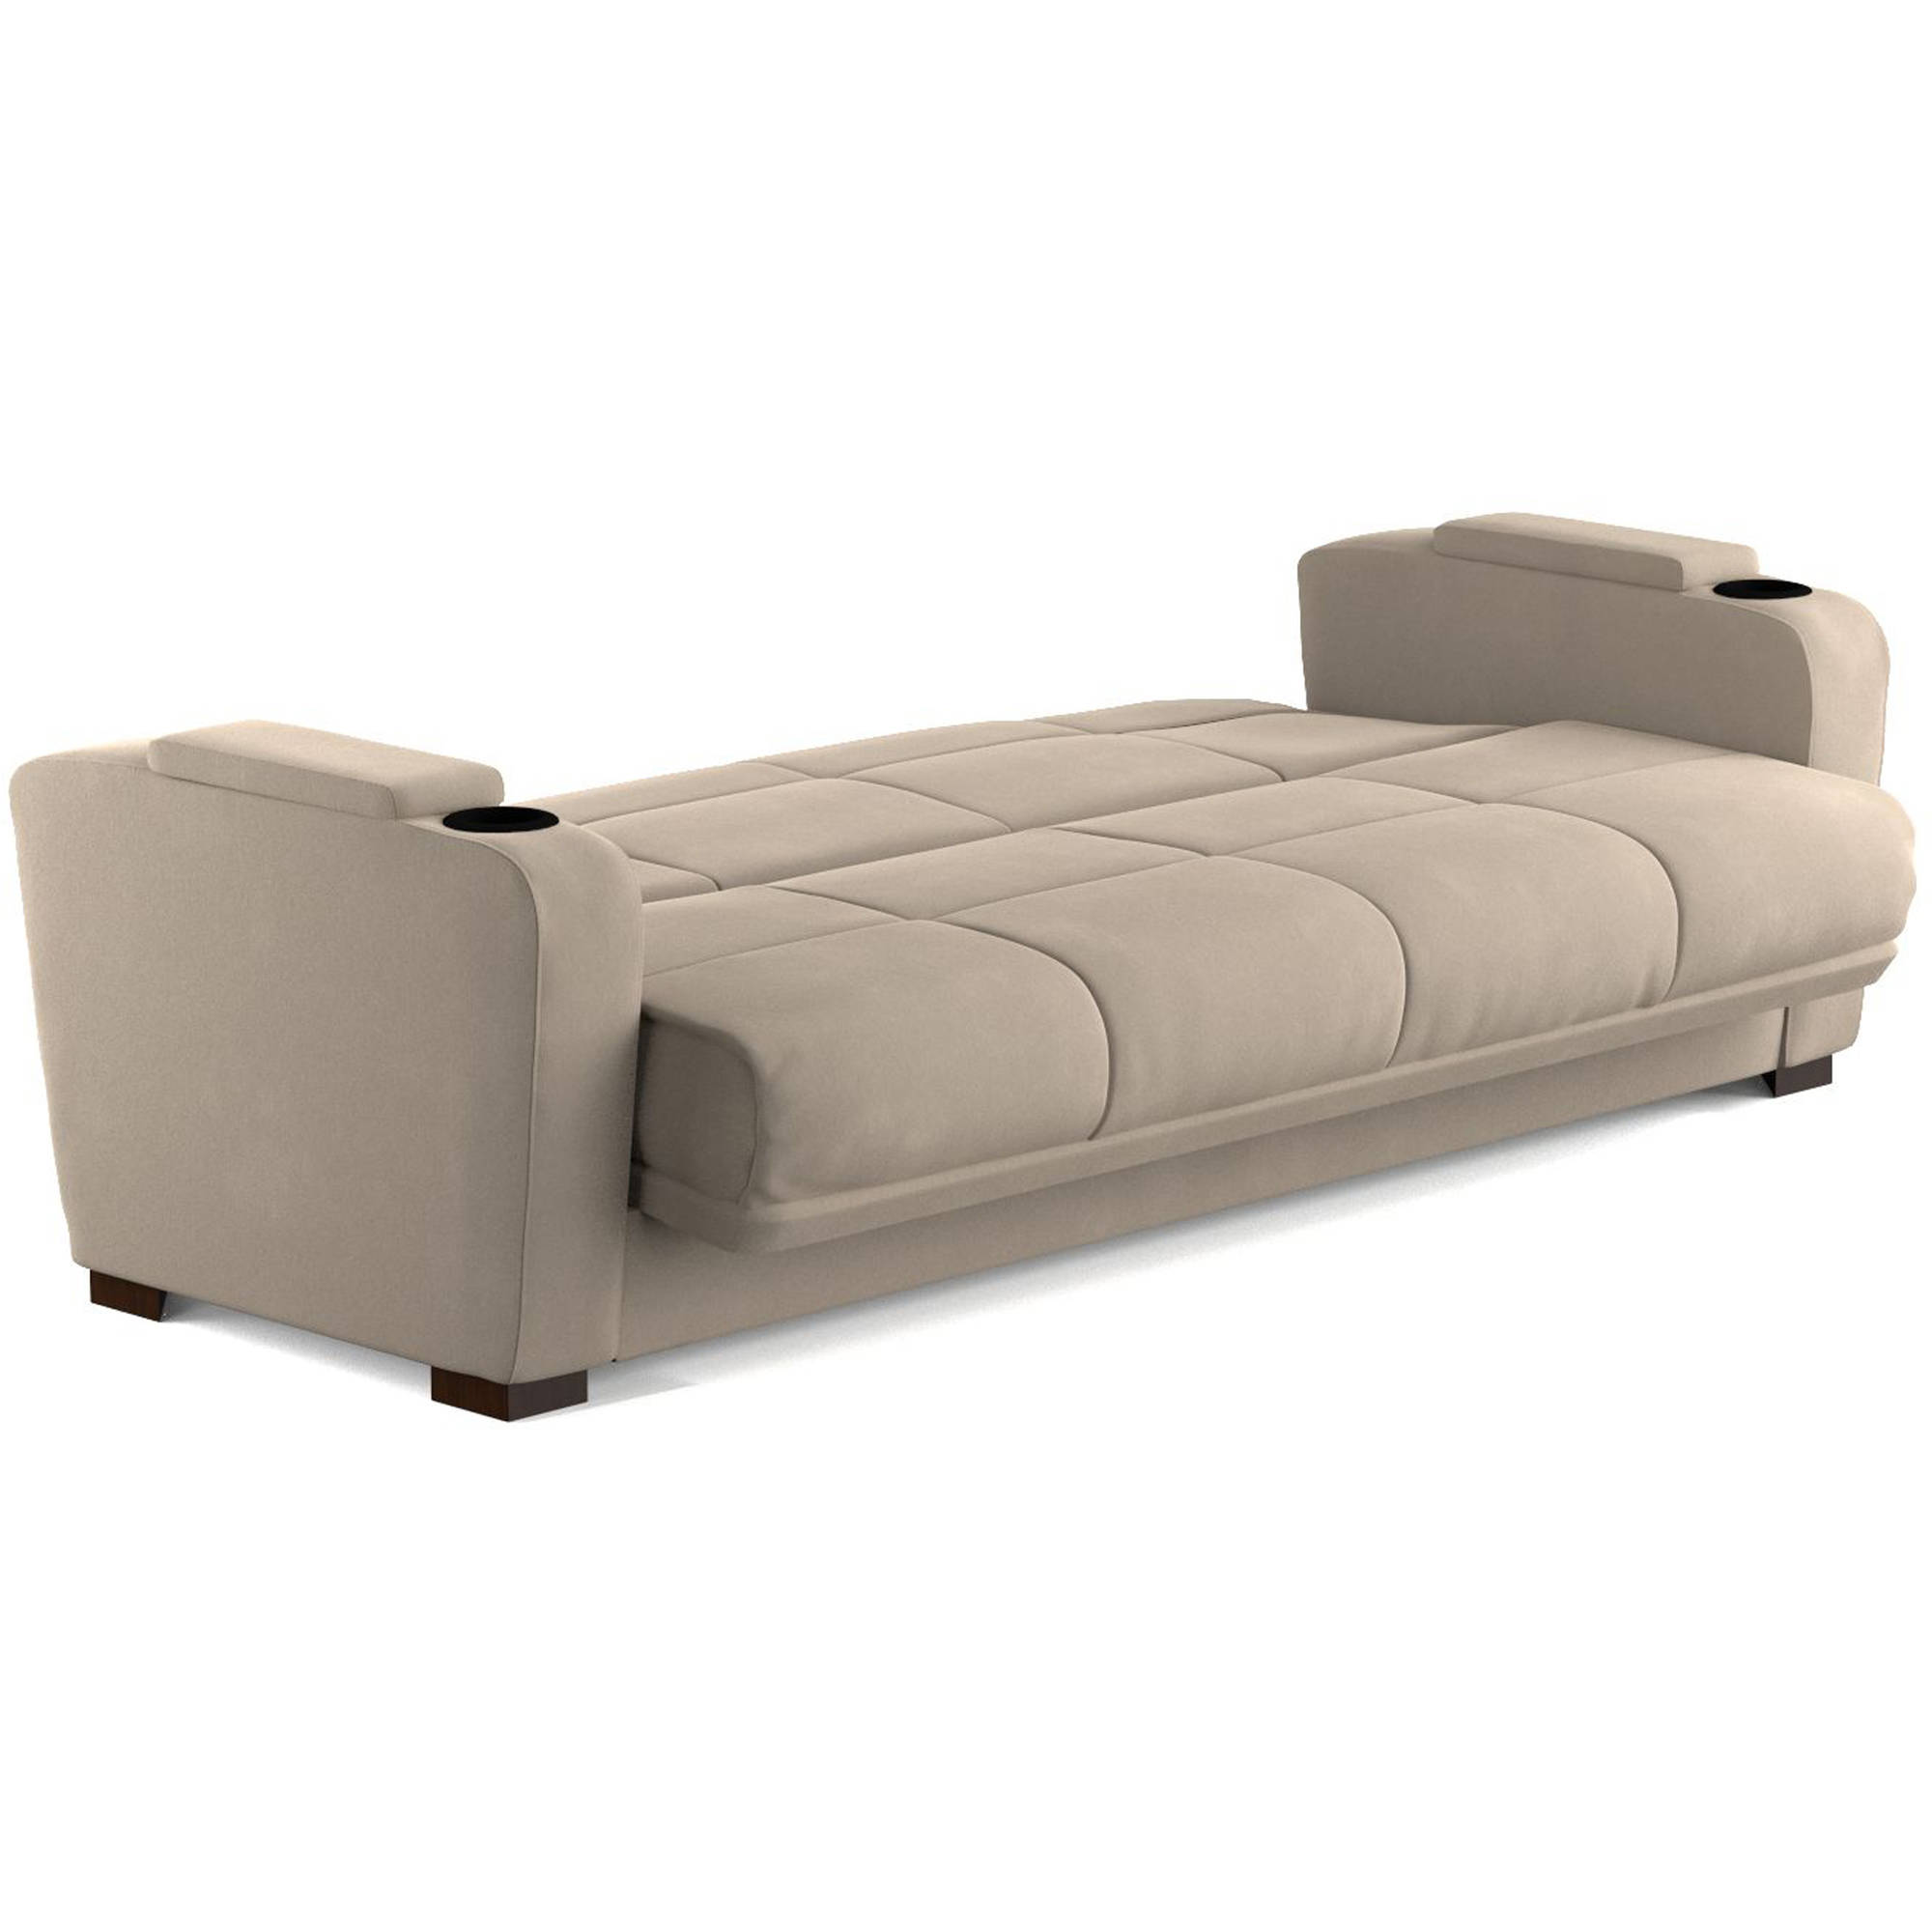 couch sofa bed mainstays tyler futon with storage sofa sleeper bed, multiple colors -  walmart.com RDVRZRB